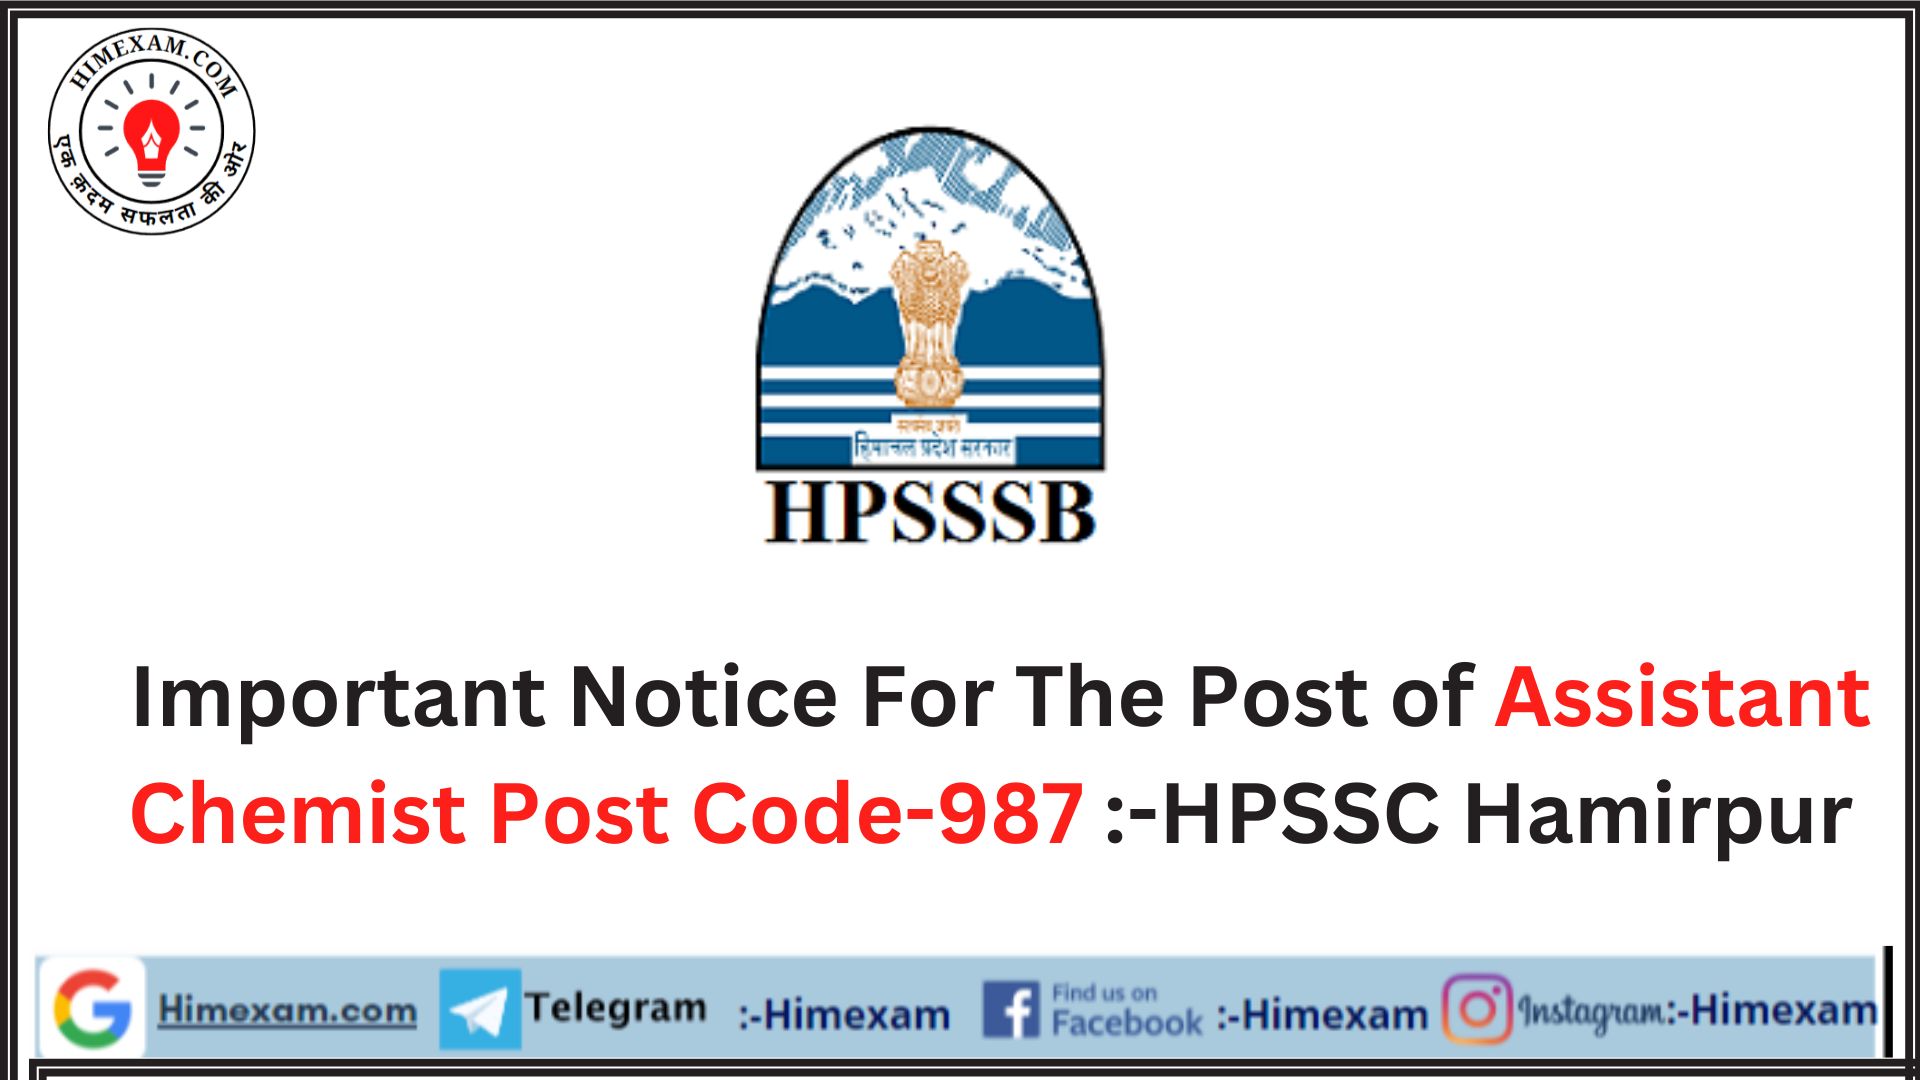 Important Notice For The Post of Assistant Chemist Post Code-987 :-HPSSC Hamirpur